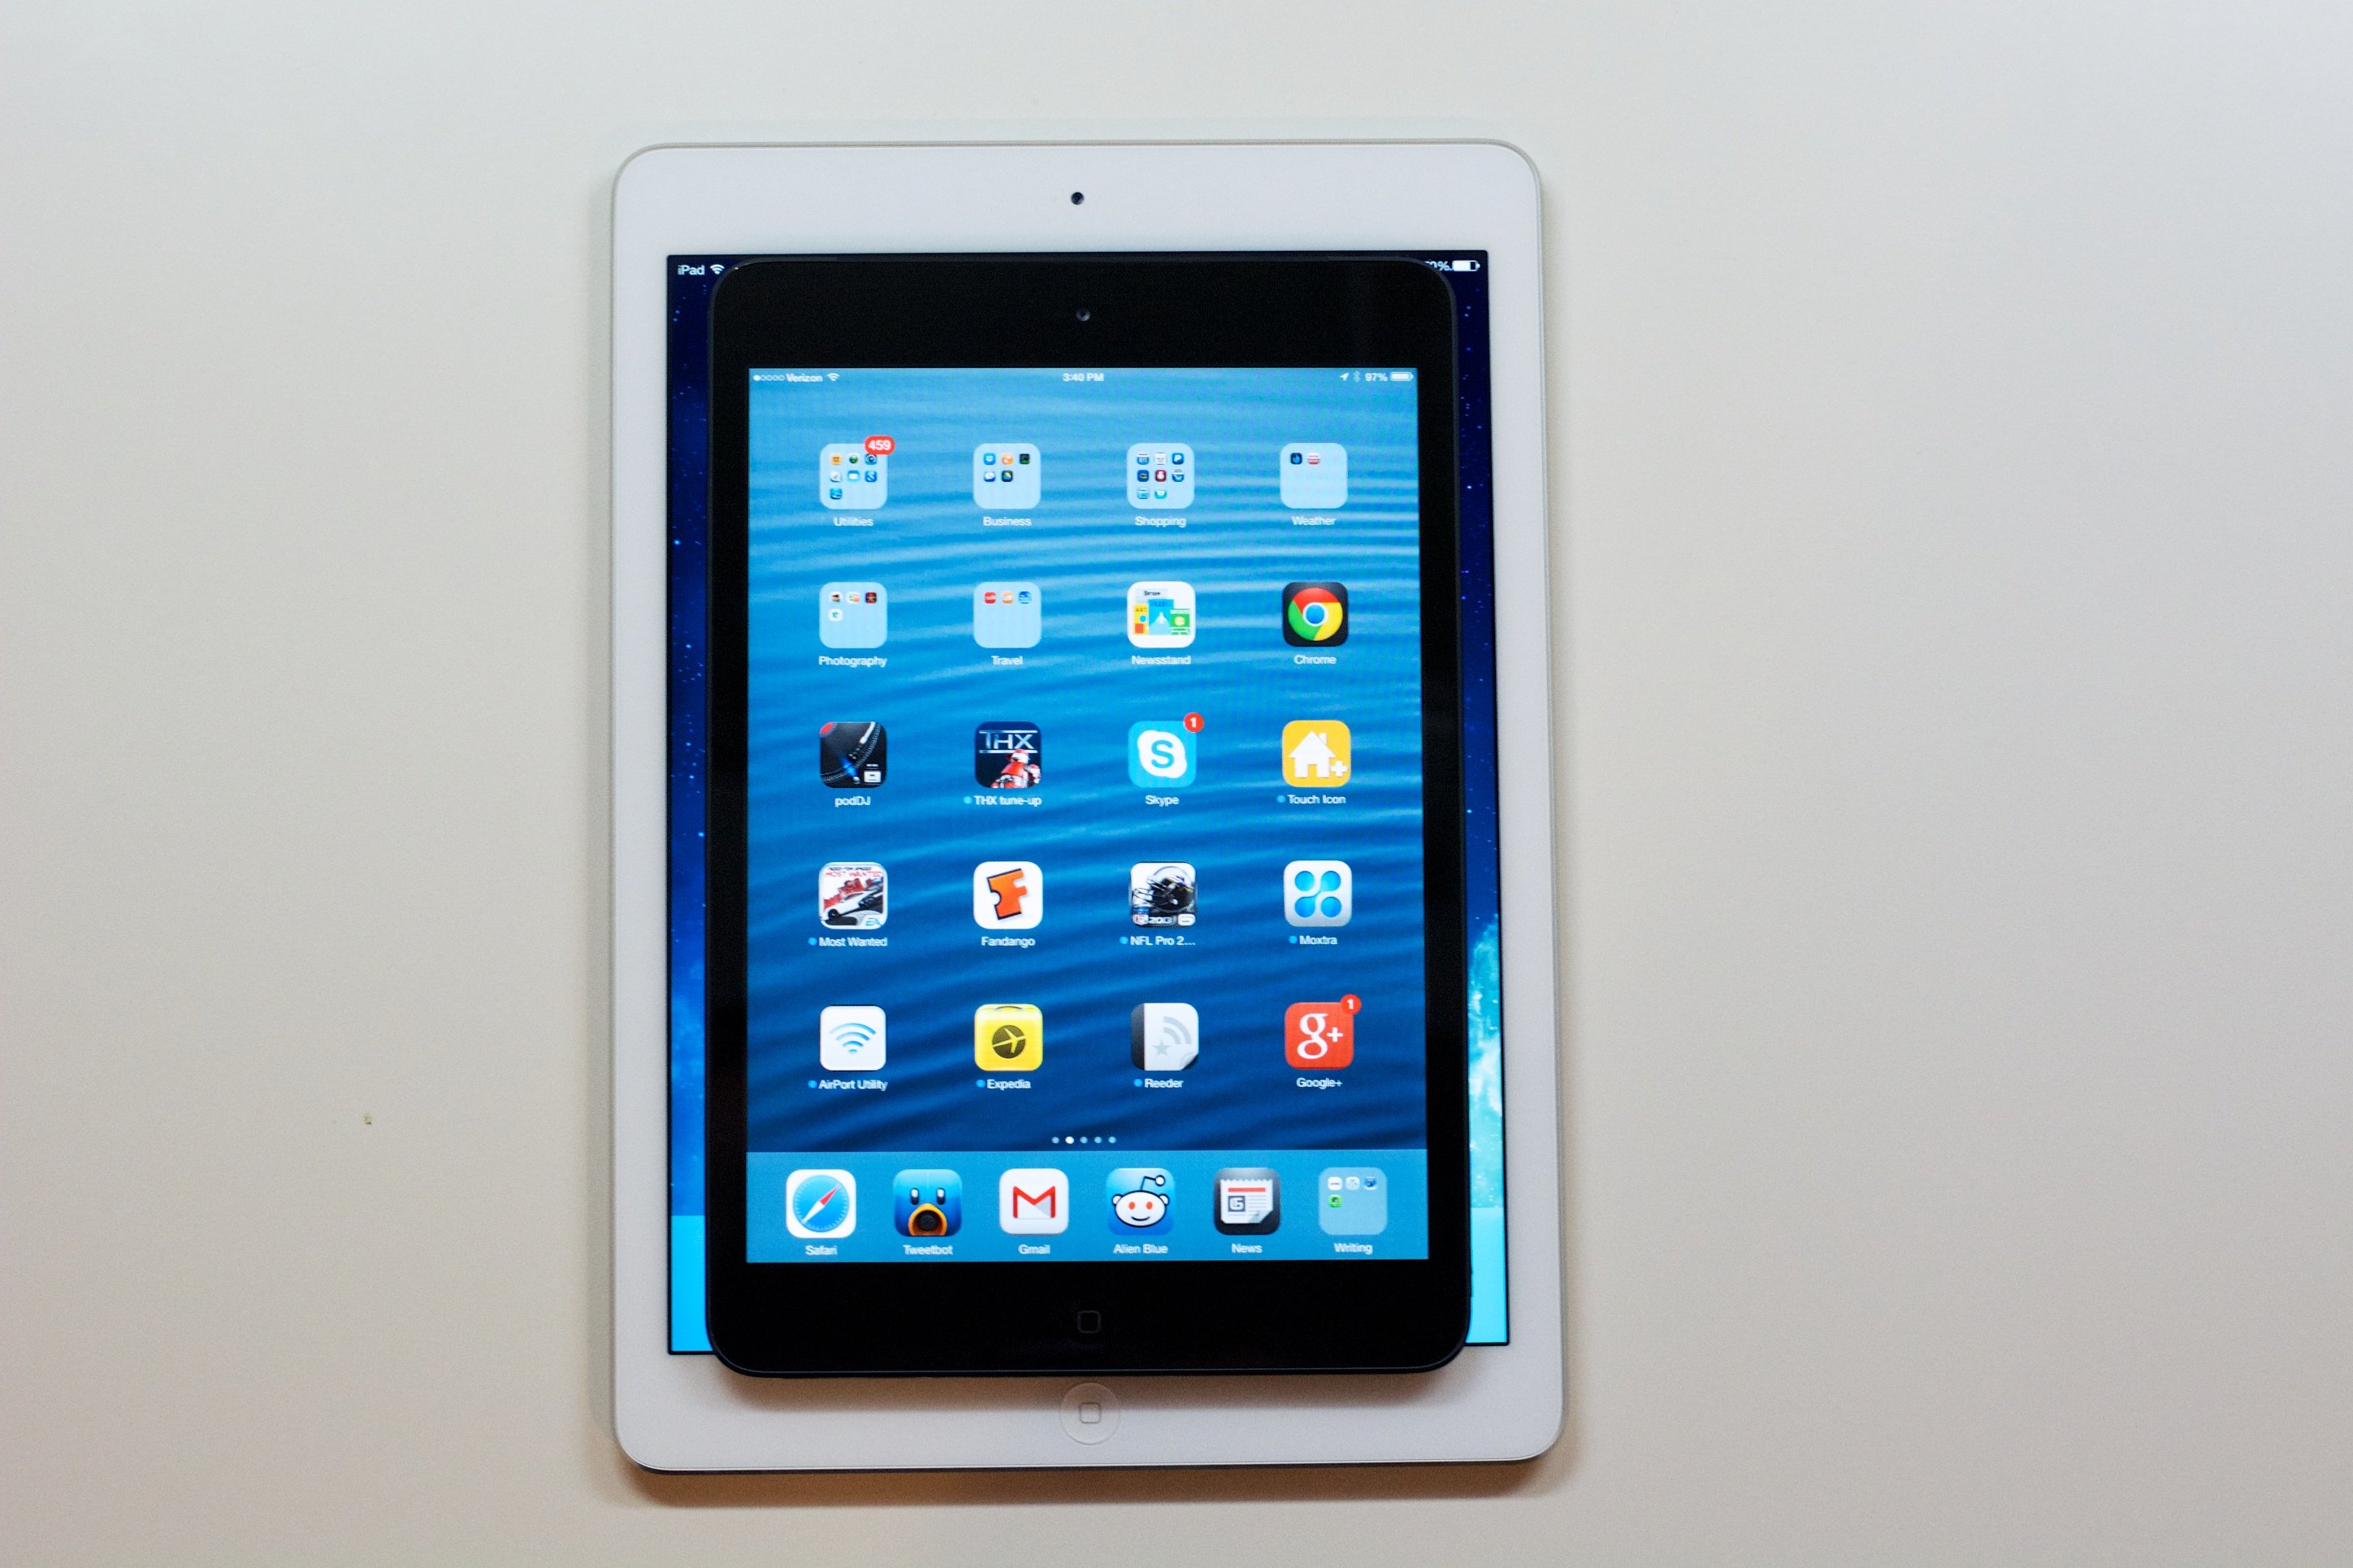 Ipad mini with retina display review android authority giveaway metion